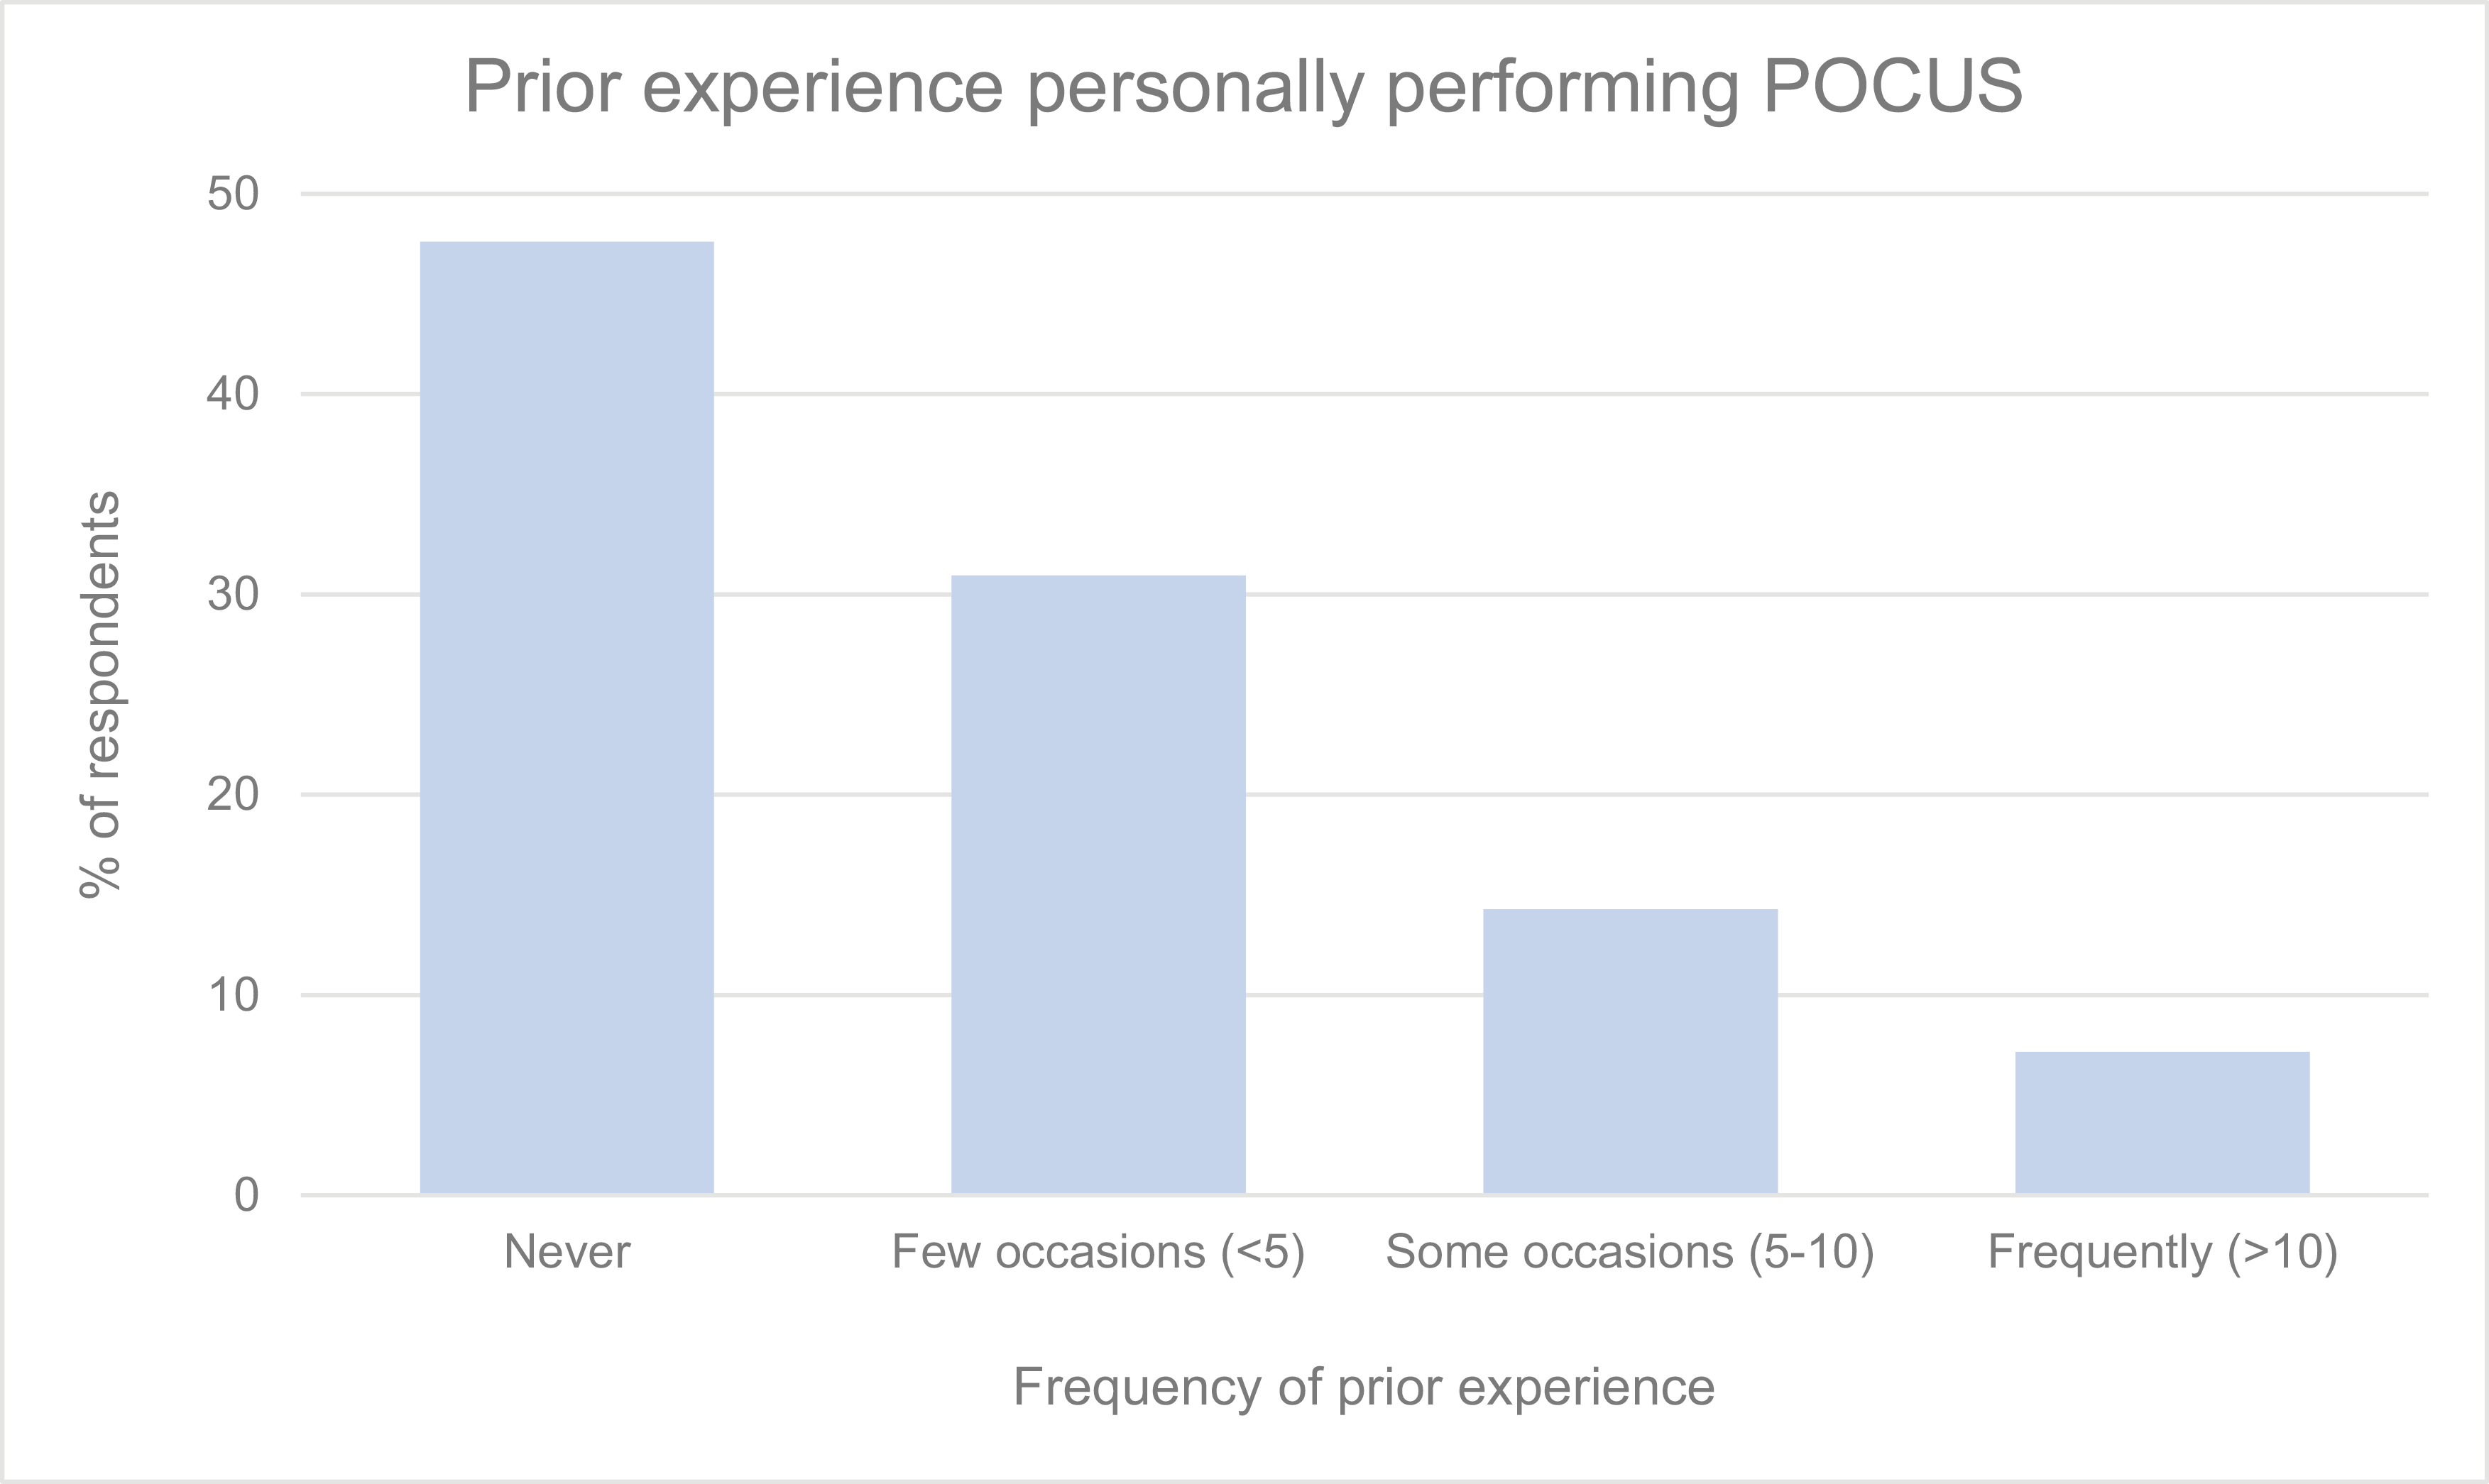 Frequency of respondents’ prior experiences personally performing any kind of POCUS on one of their patients prior to the intervention